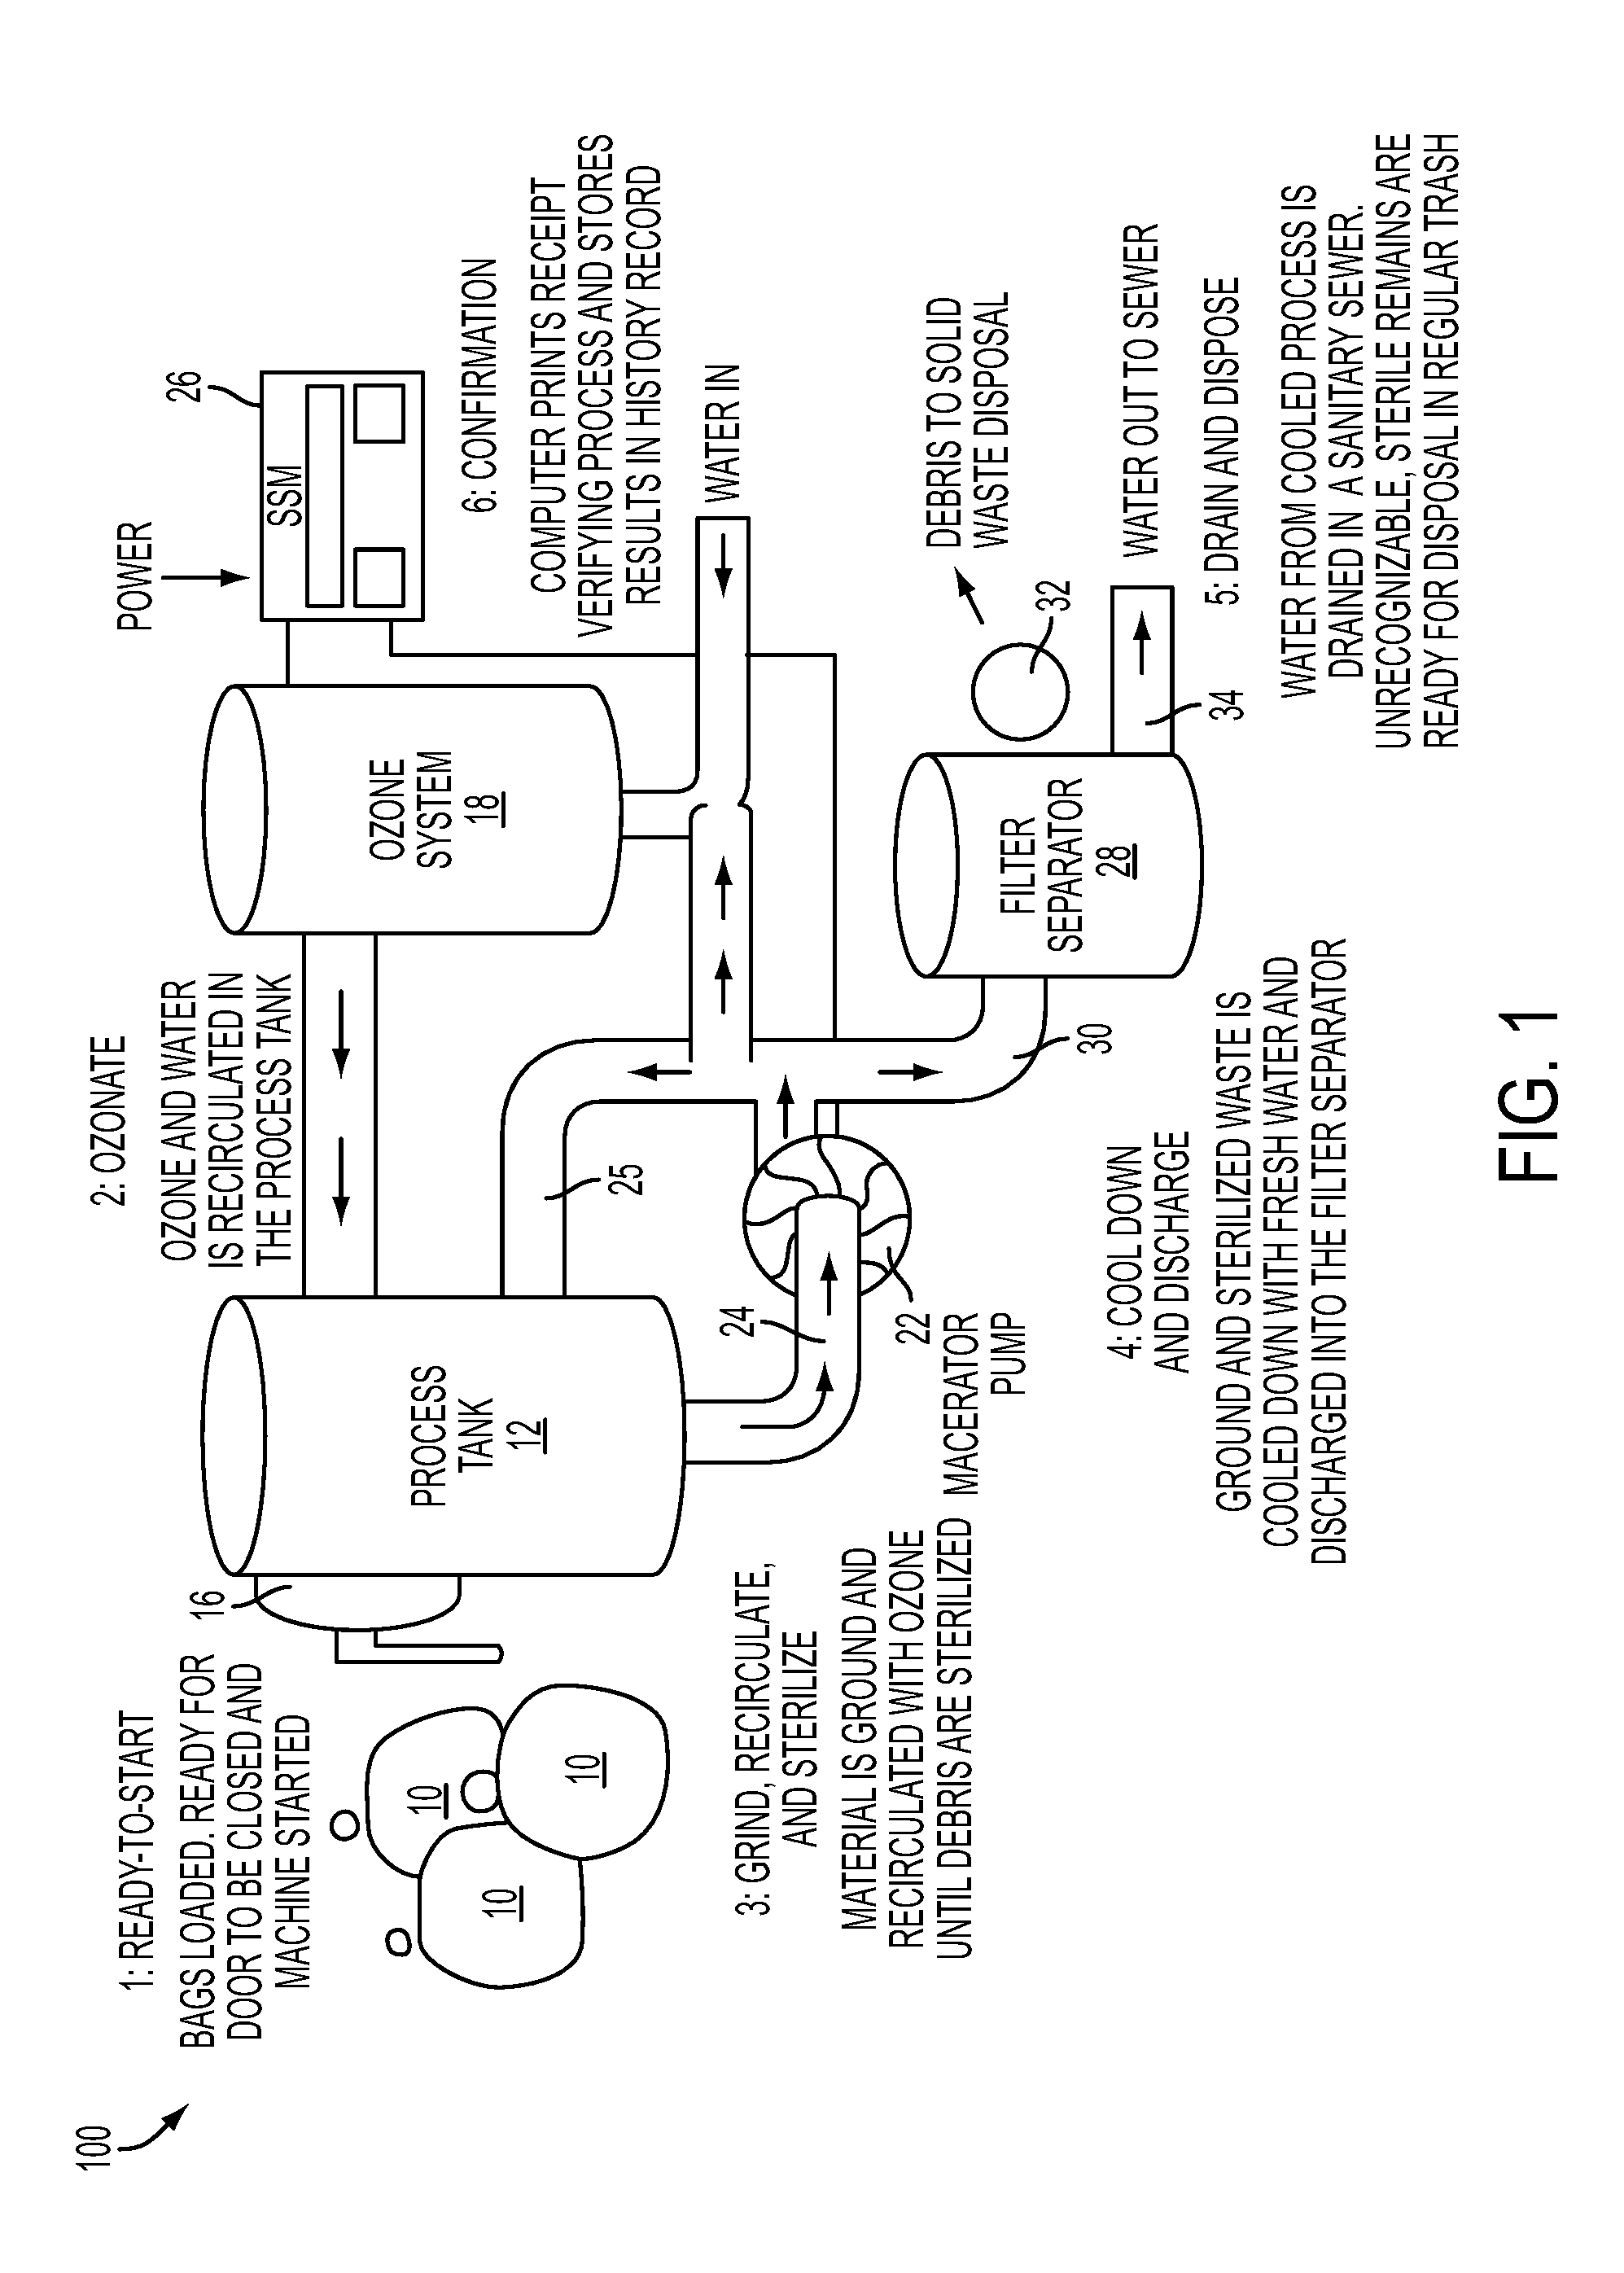 System and method for processing waste material